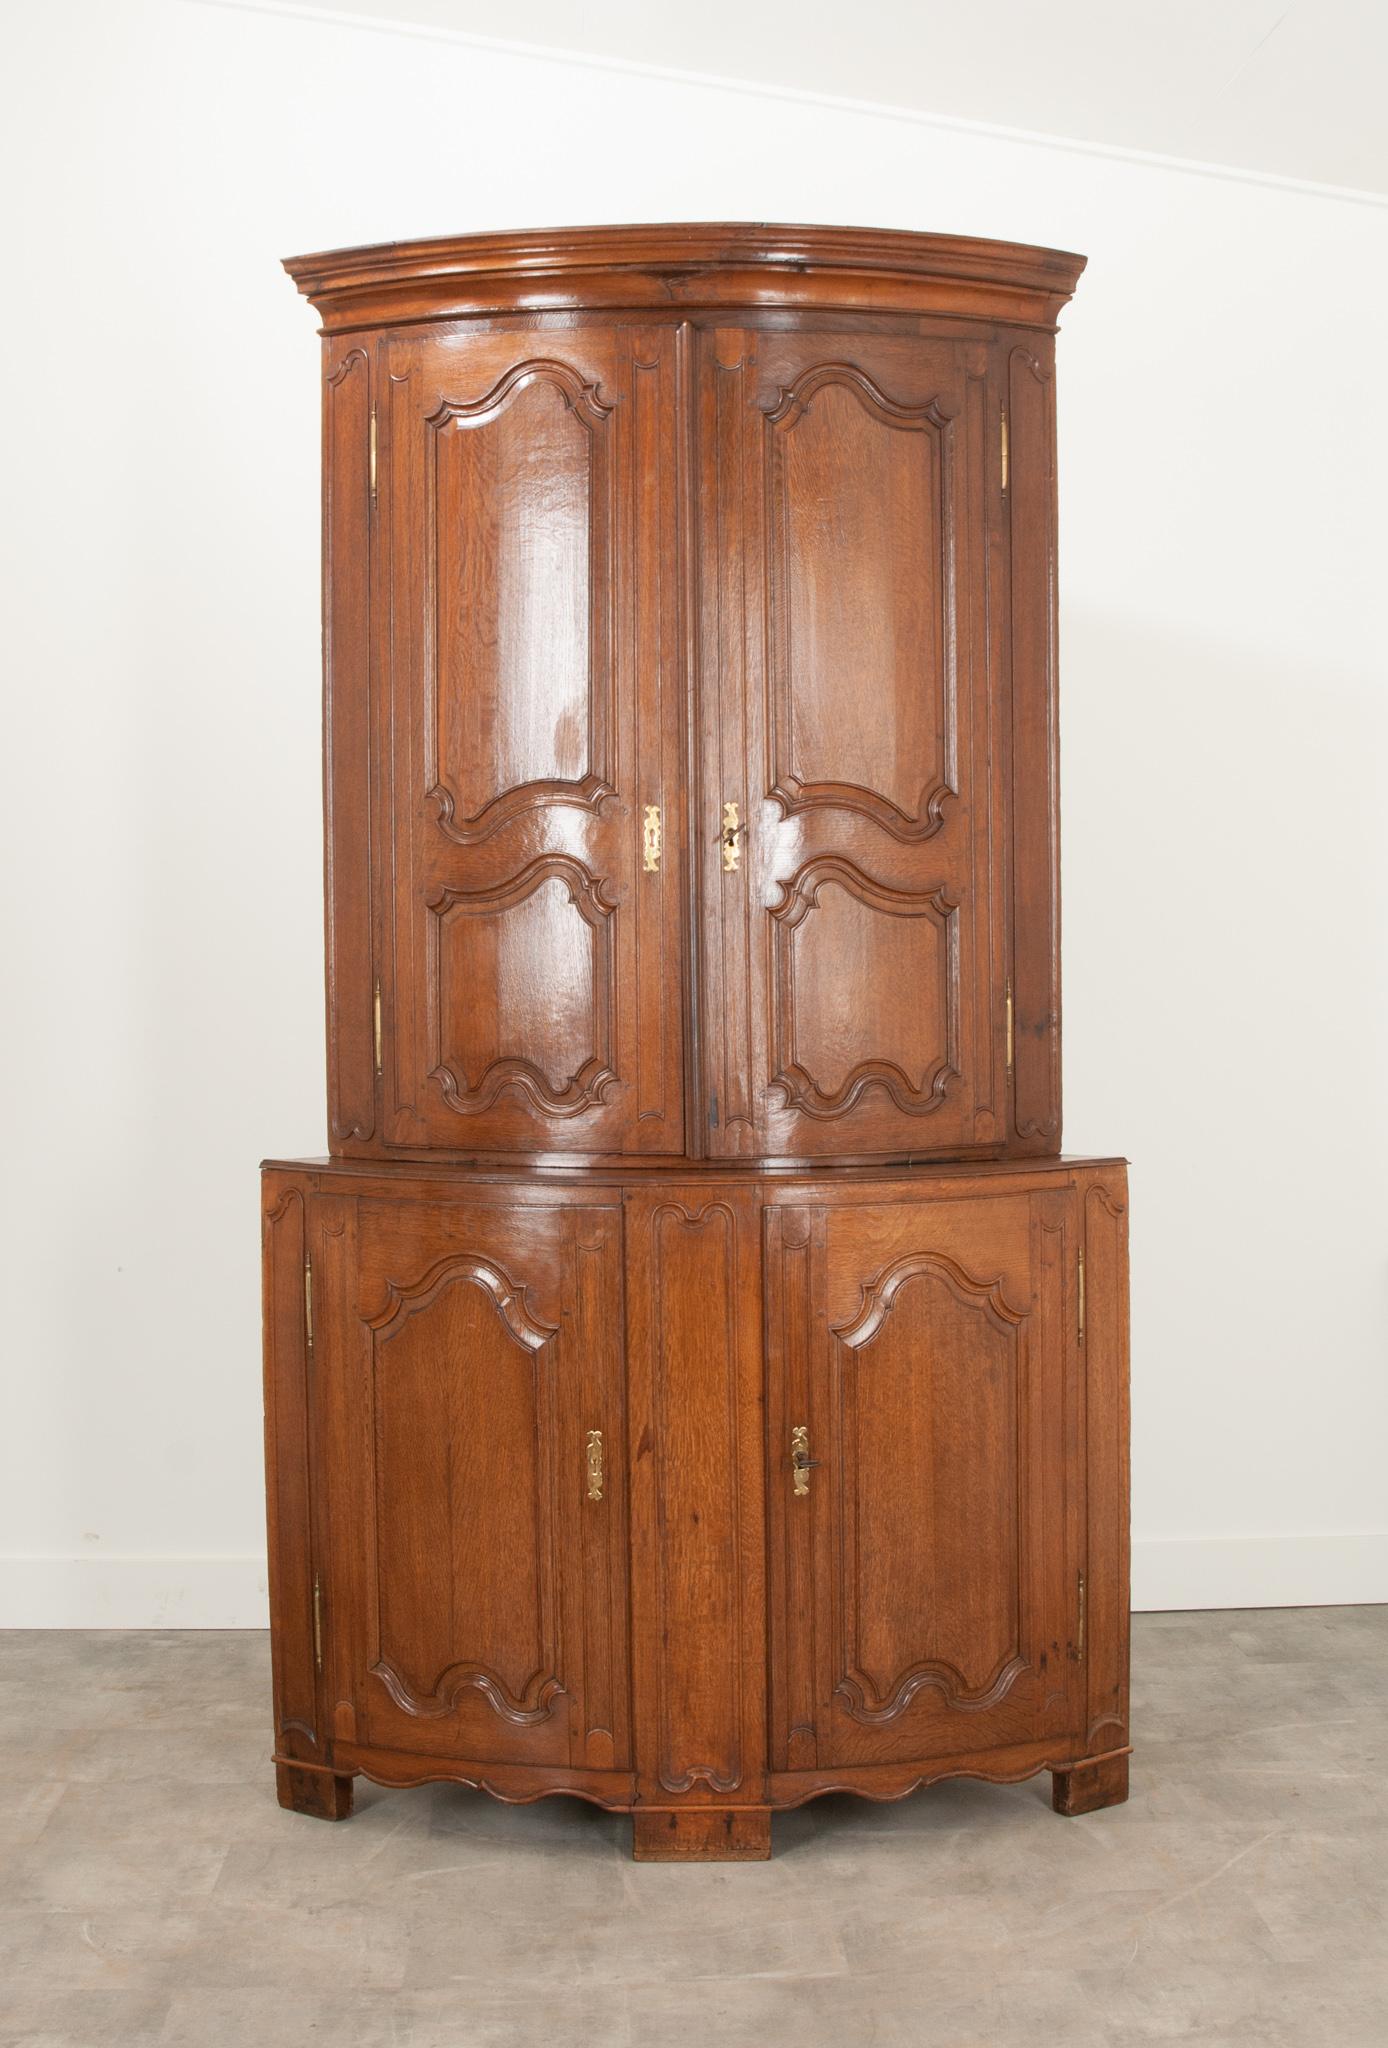 This substantial corner buffet a deux corps was made in 19th century France from solid walnut. The top portion is crowned with a molded cornice over rounded double doors with shapely carved panels. Unlocking the solid doors reveals two fixed